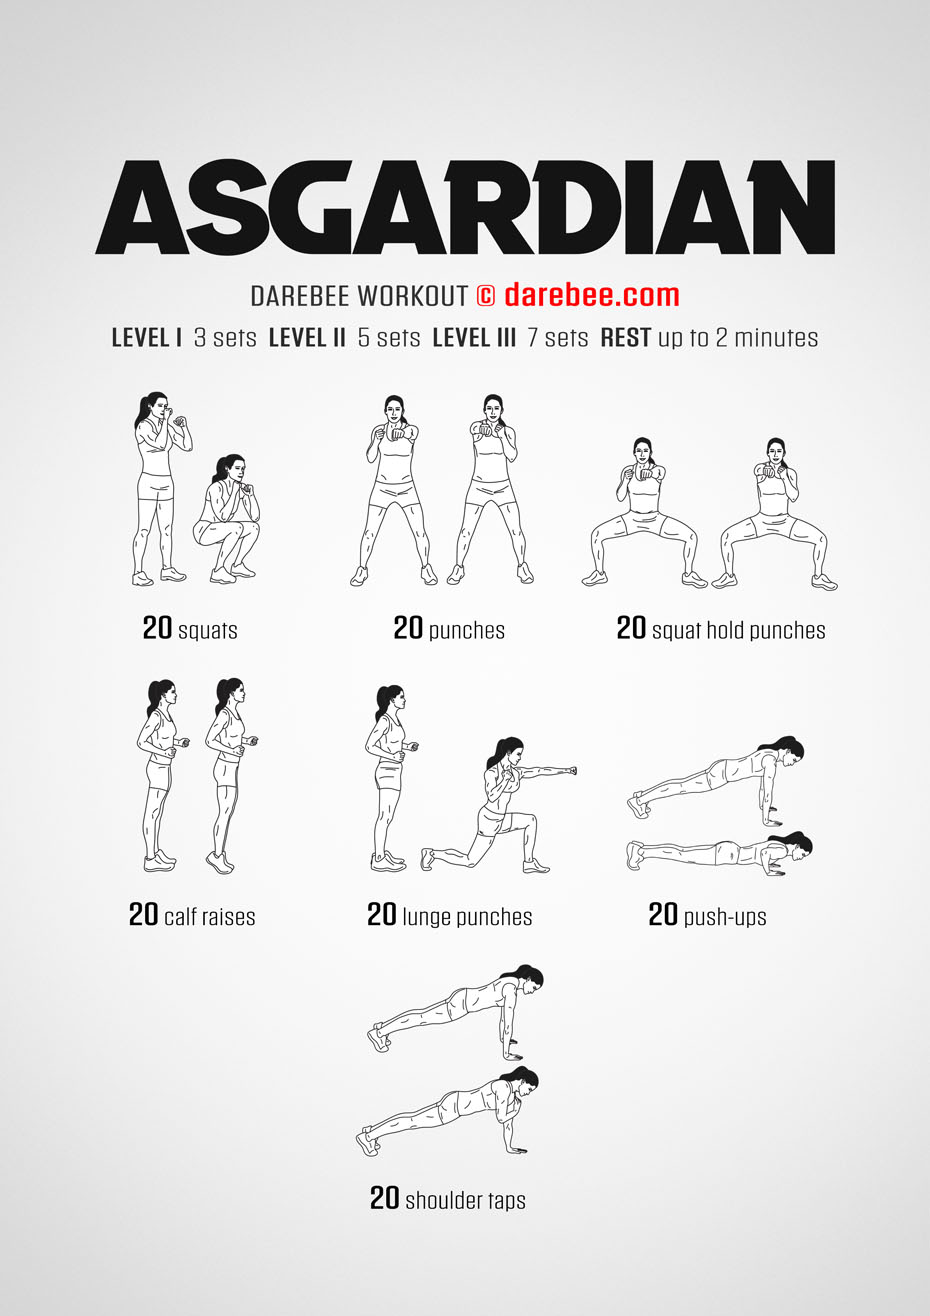 Asgardian is a DAREBEE no-equipment full body strength home fitness workout that helps you become stronger and feel fitter.